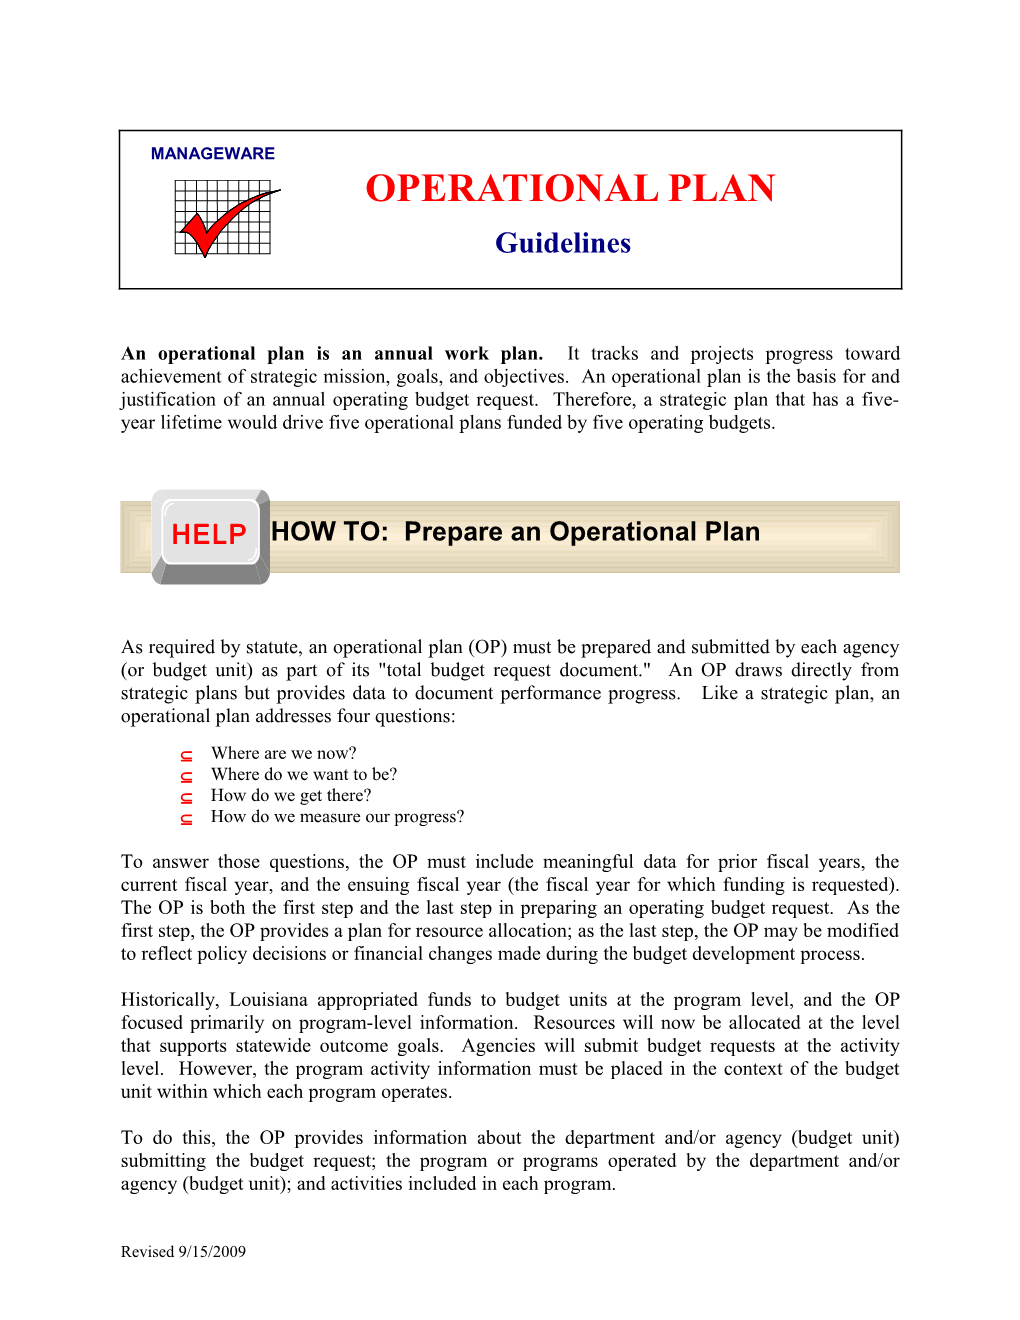 Operational Plan Format, Guidelines, and Instructions 1